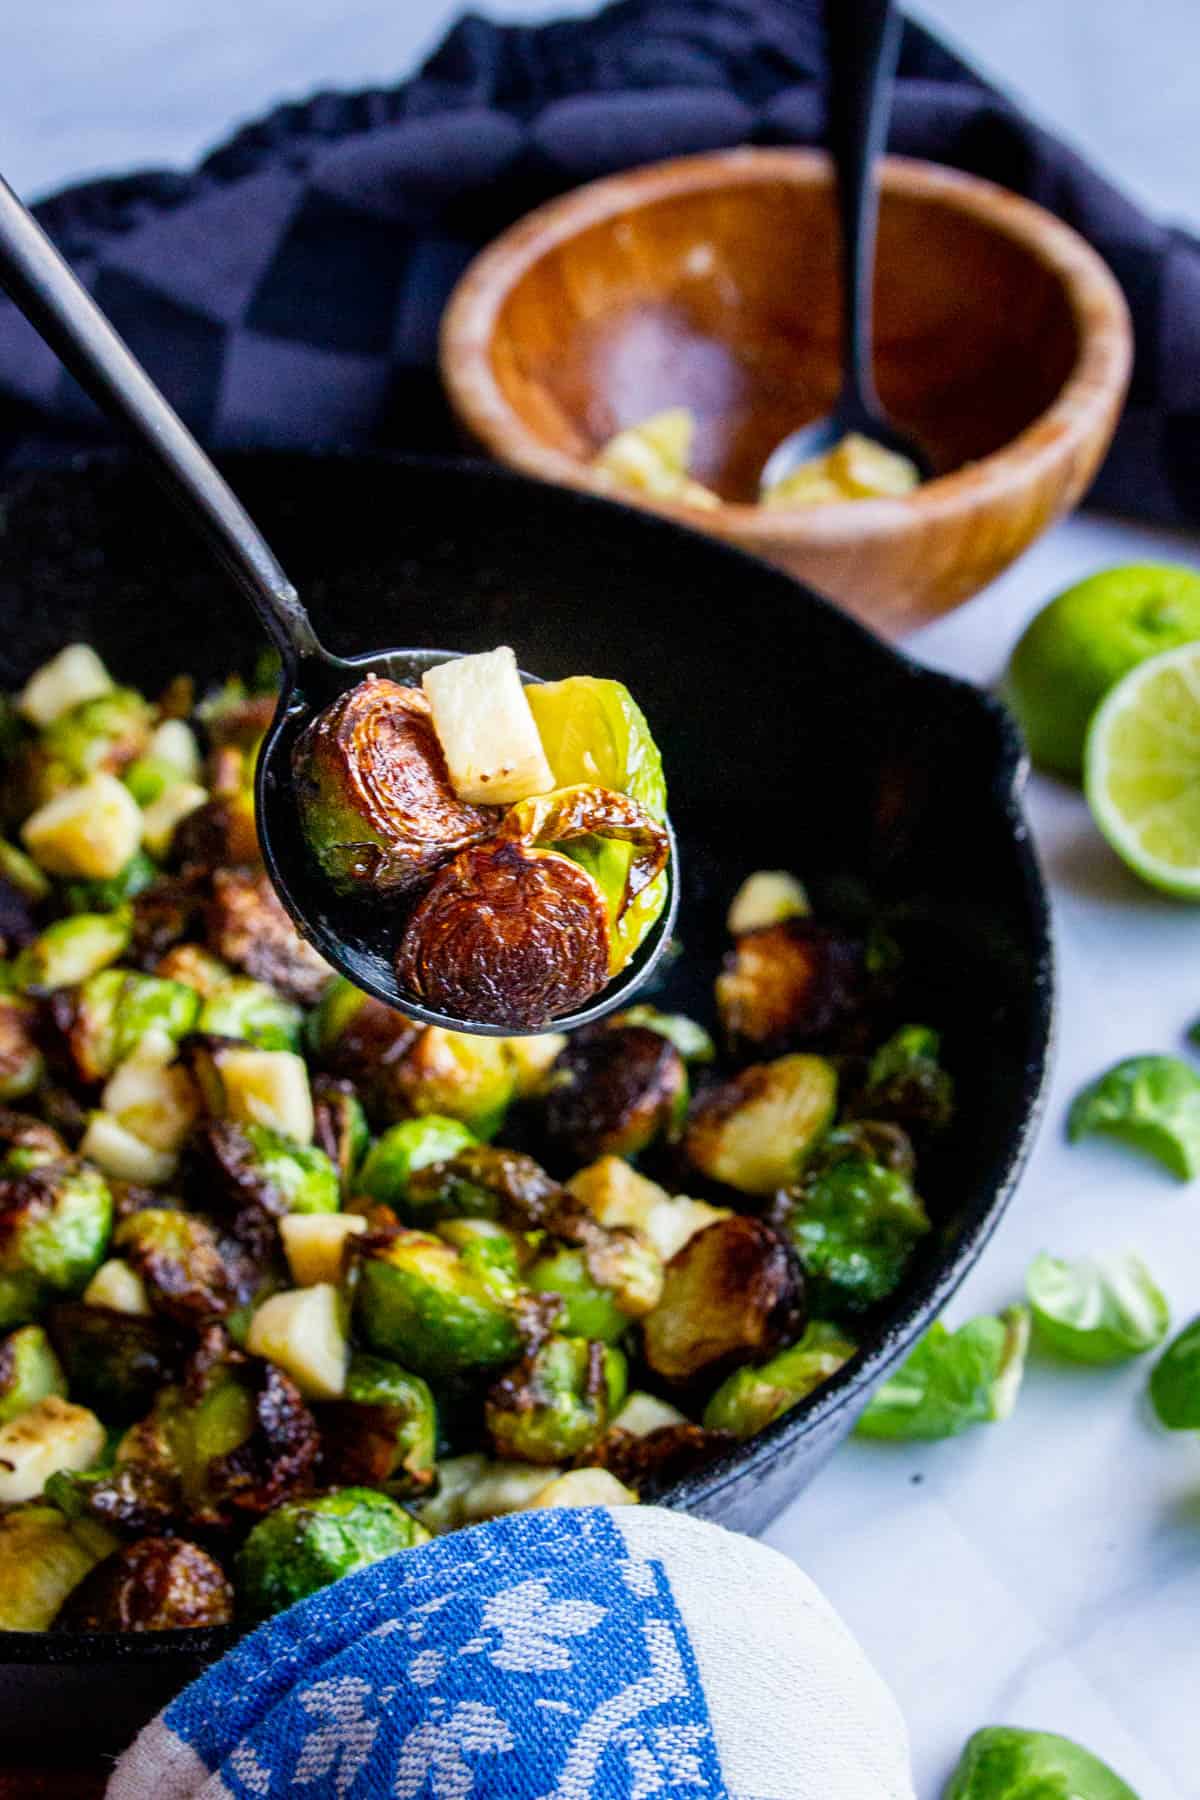 Crispy roasted brussel sprouts on a spoon over a cast iron pan.